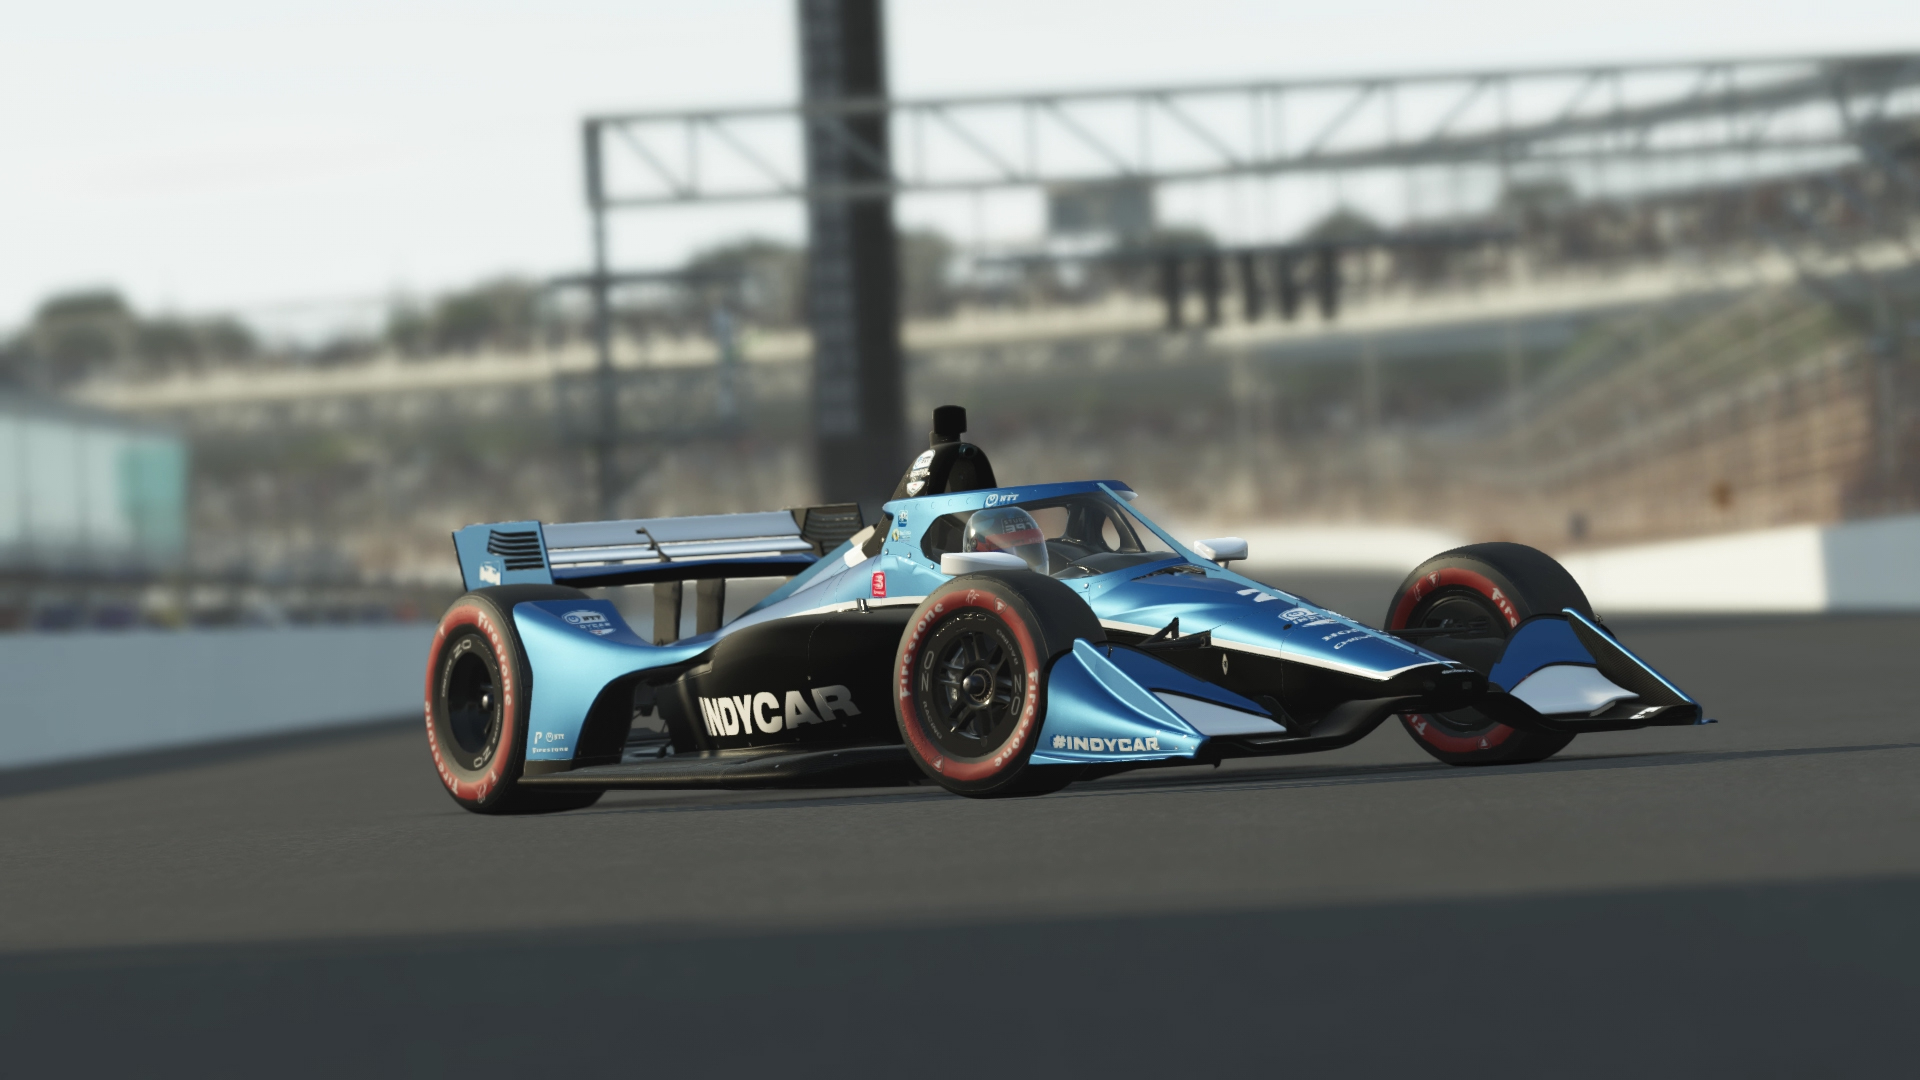 Forza Motorsport 7 adds new IndyCars, tries to fix multiplayer